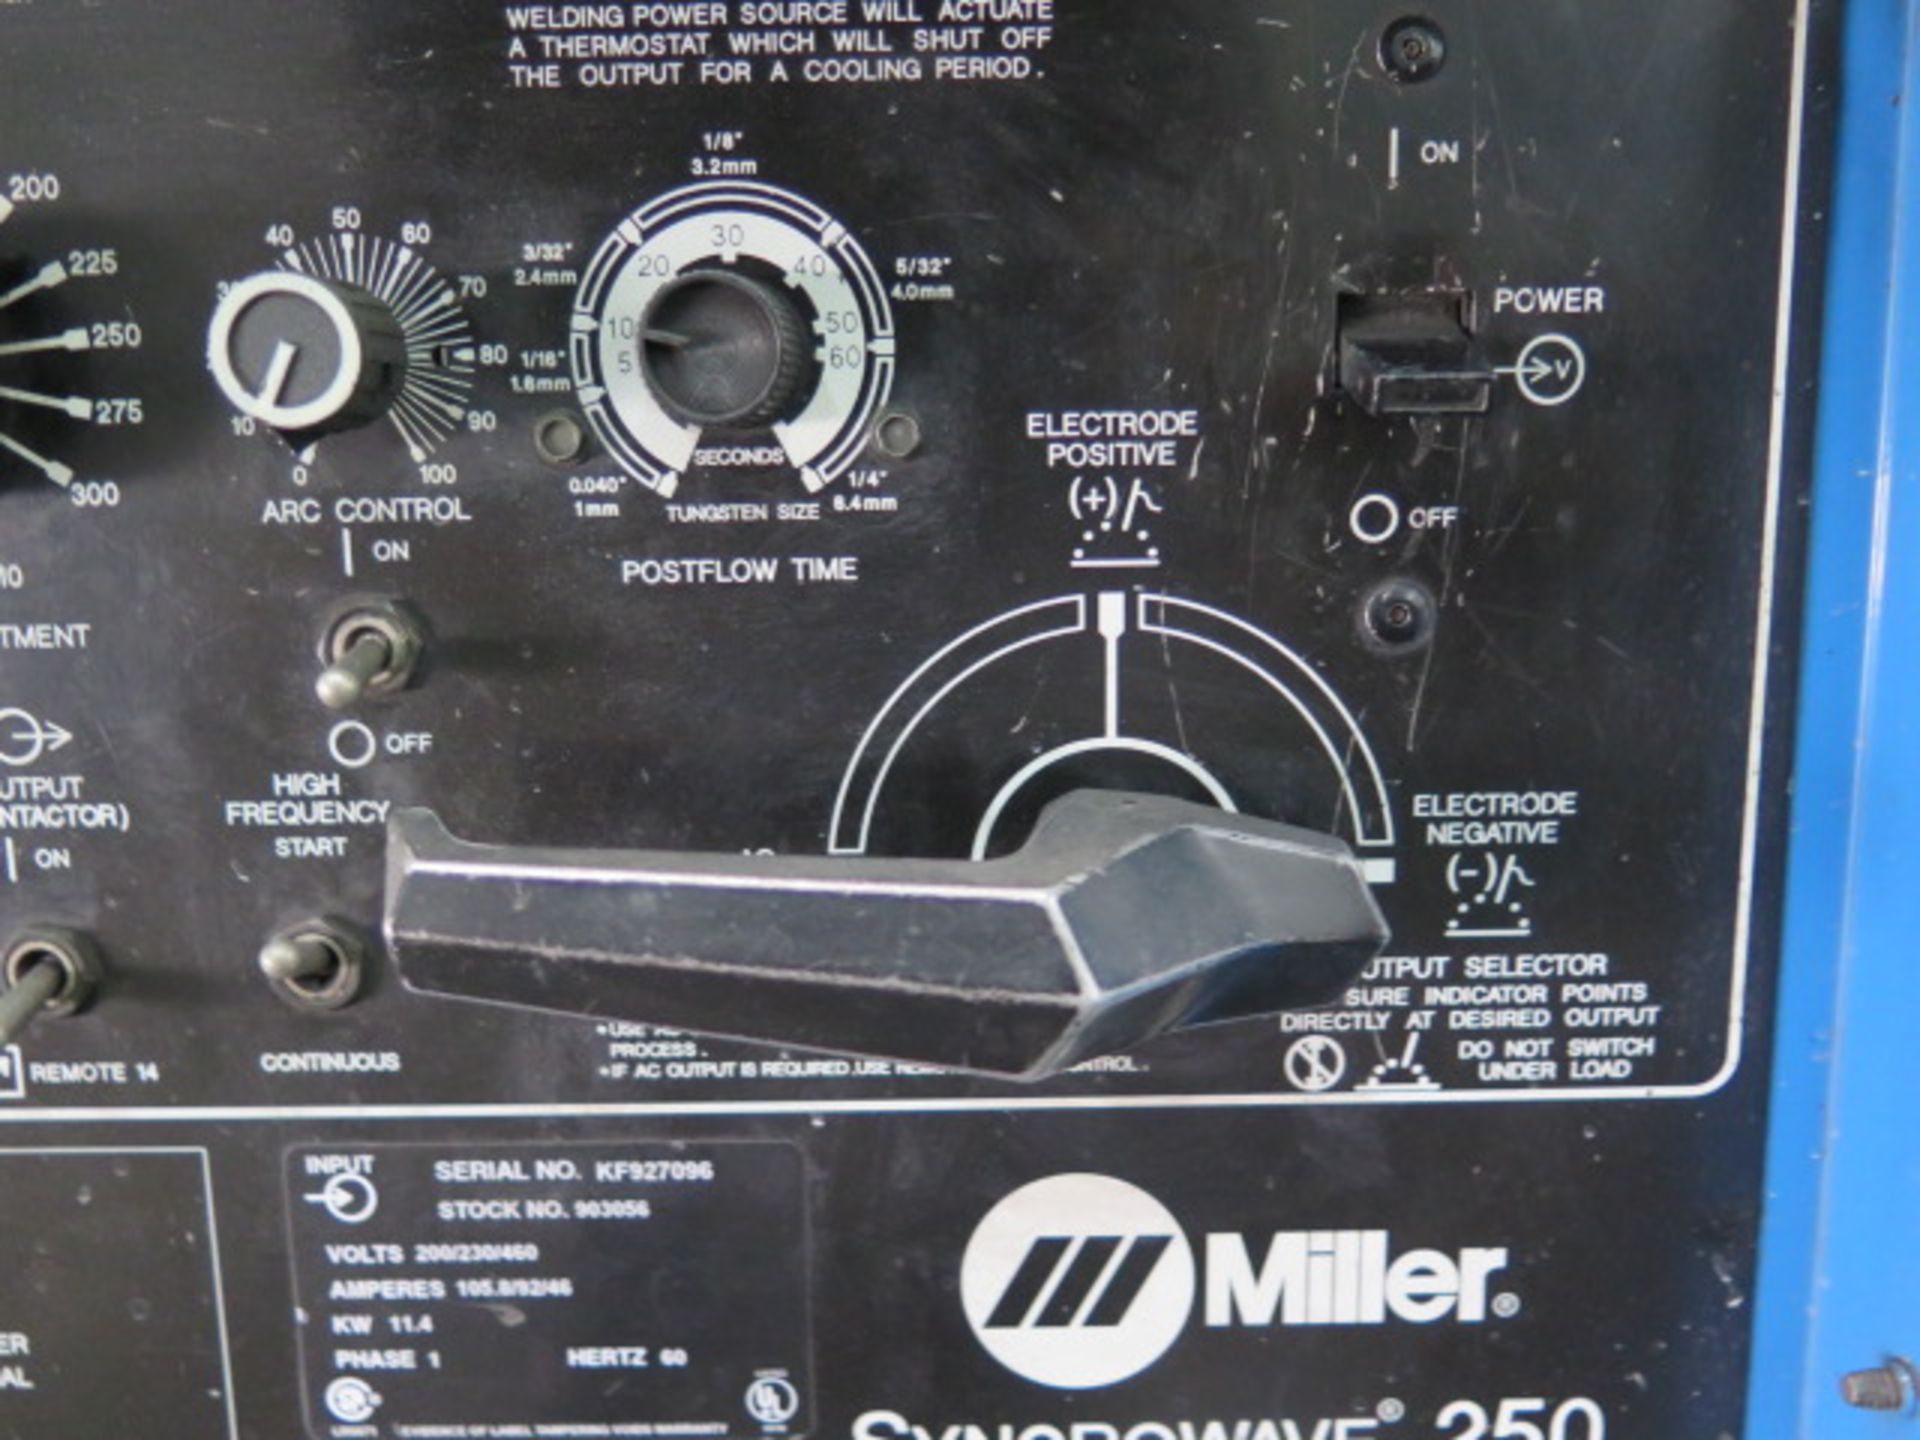 Miller Syncrowave 250 CC-AC/DC Arc Welding Power Source w/ Miller Radiator-1A Cooling, SOLD AS IS - Image 8 of 13